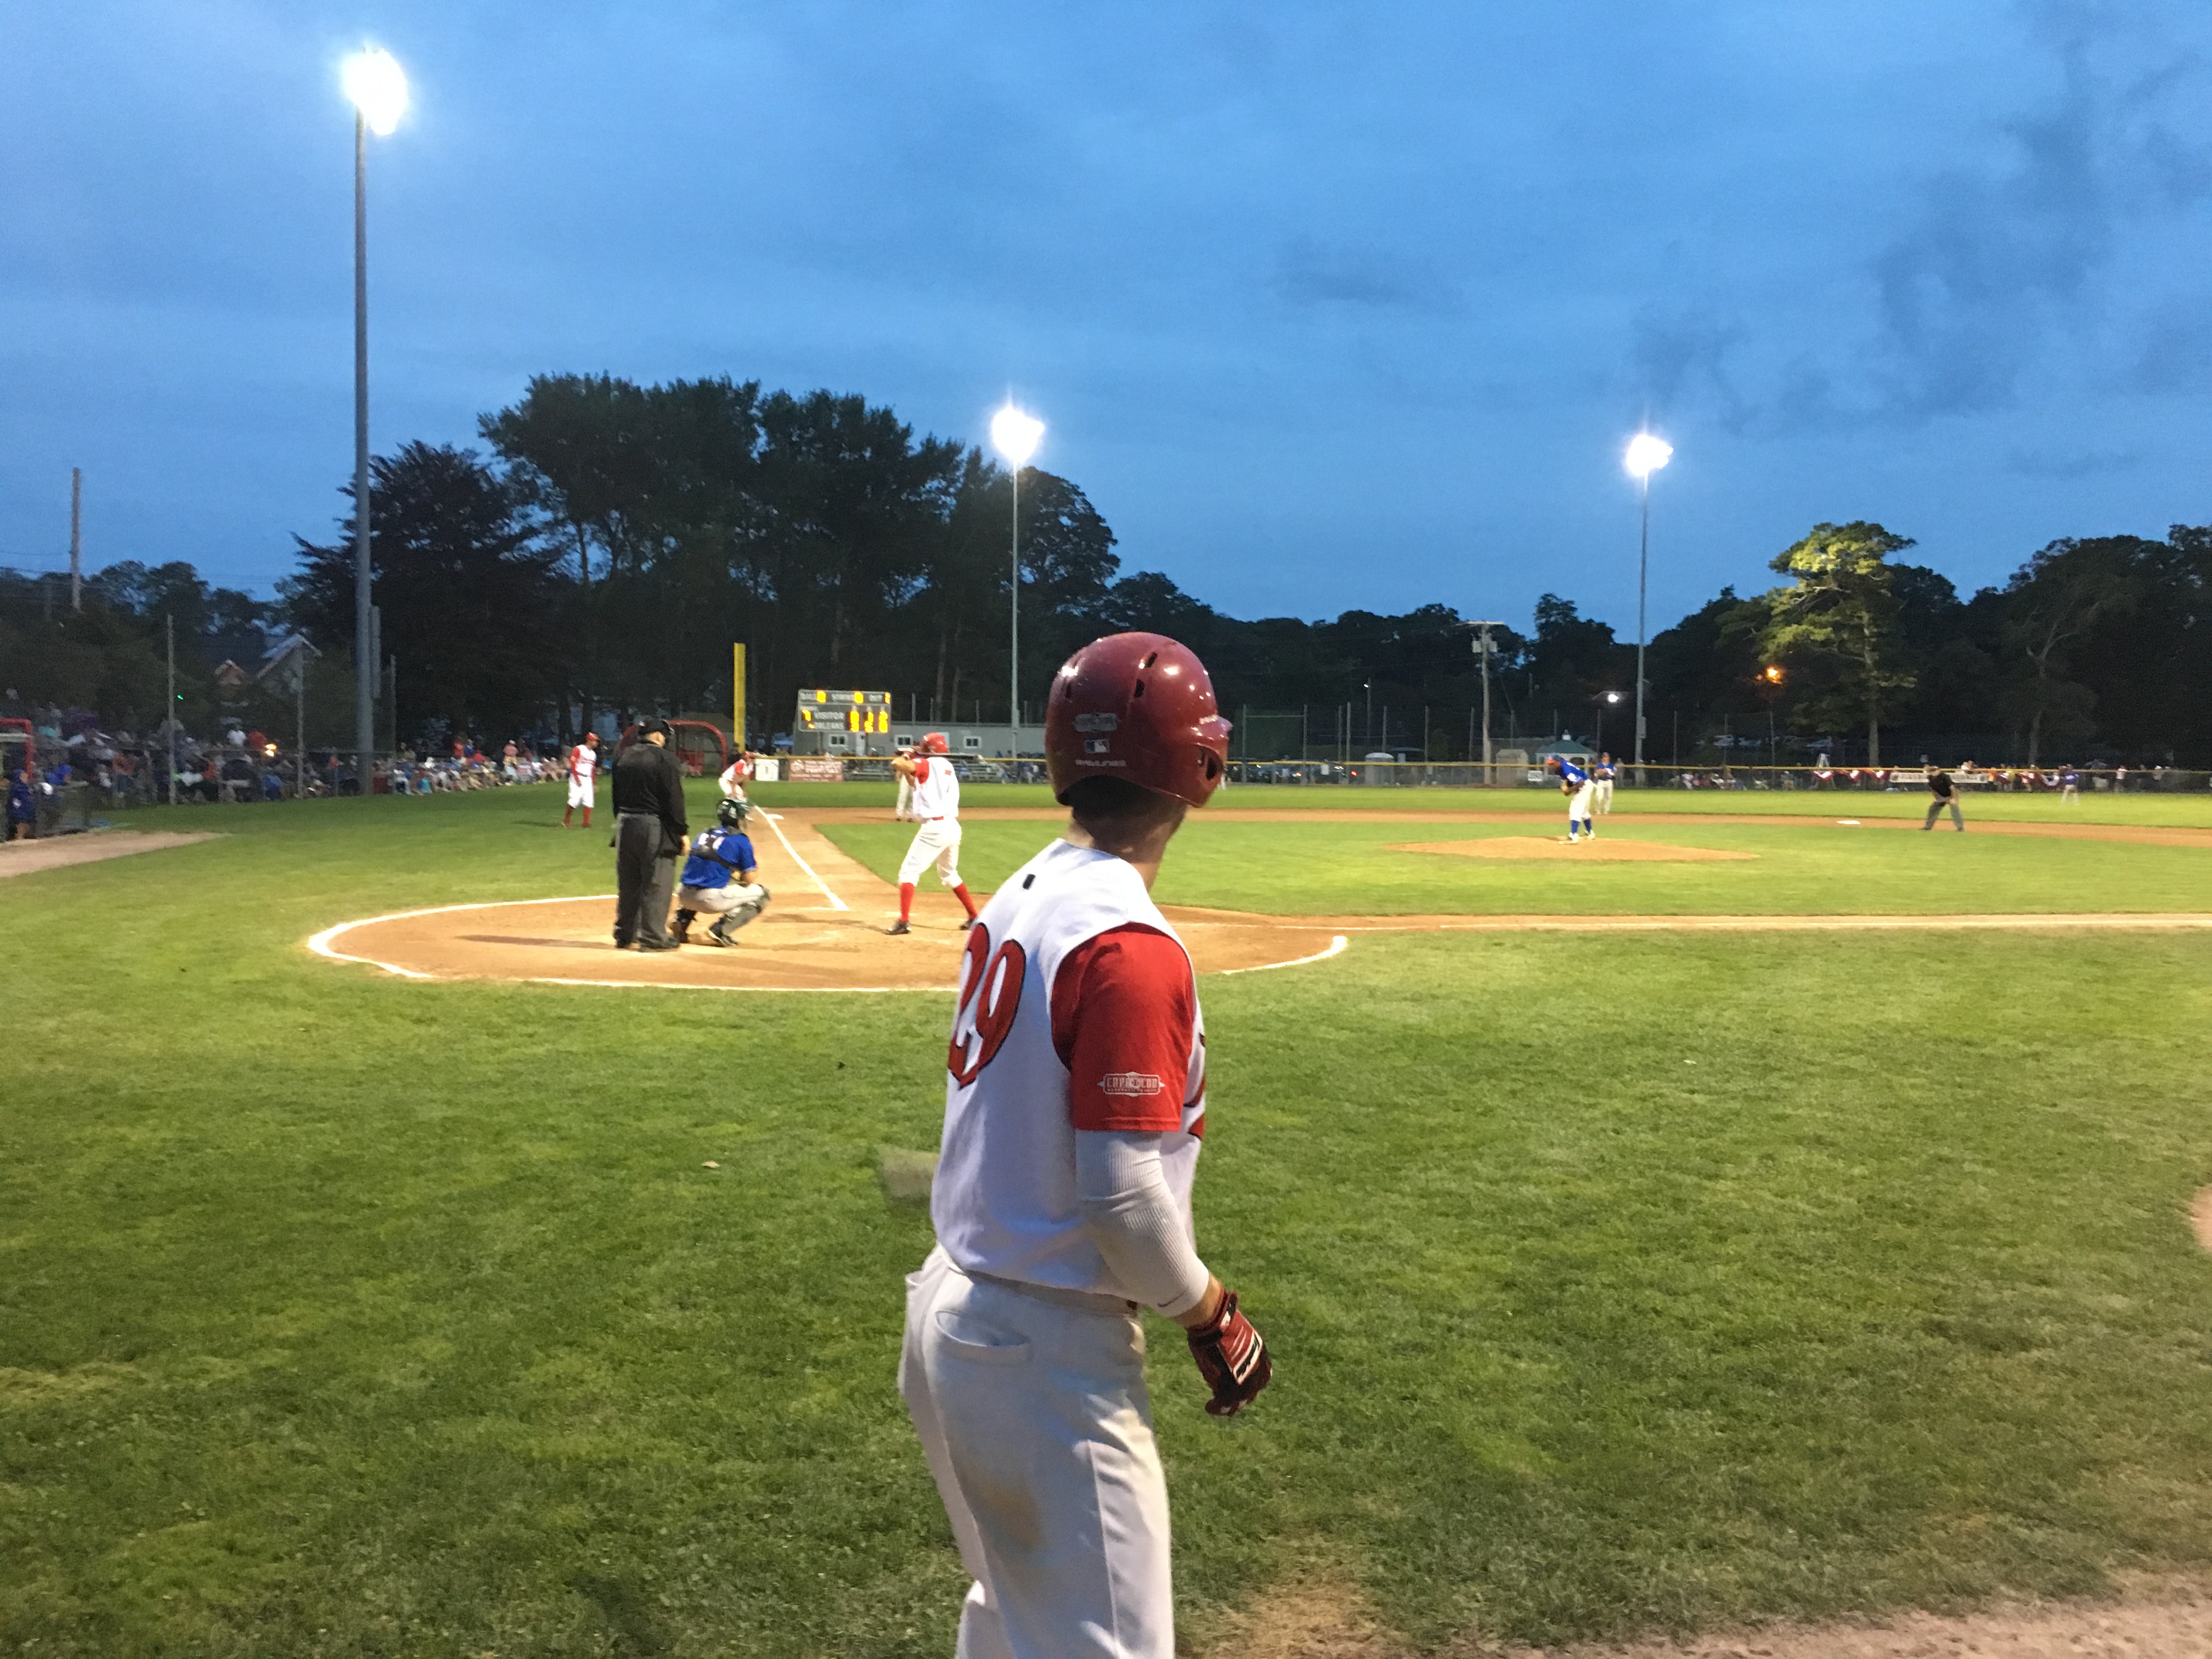 Despite its laidback vibe, the Cape Cod league is serious business for